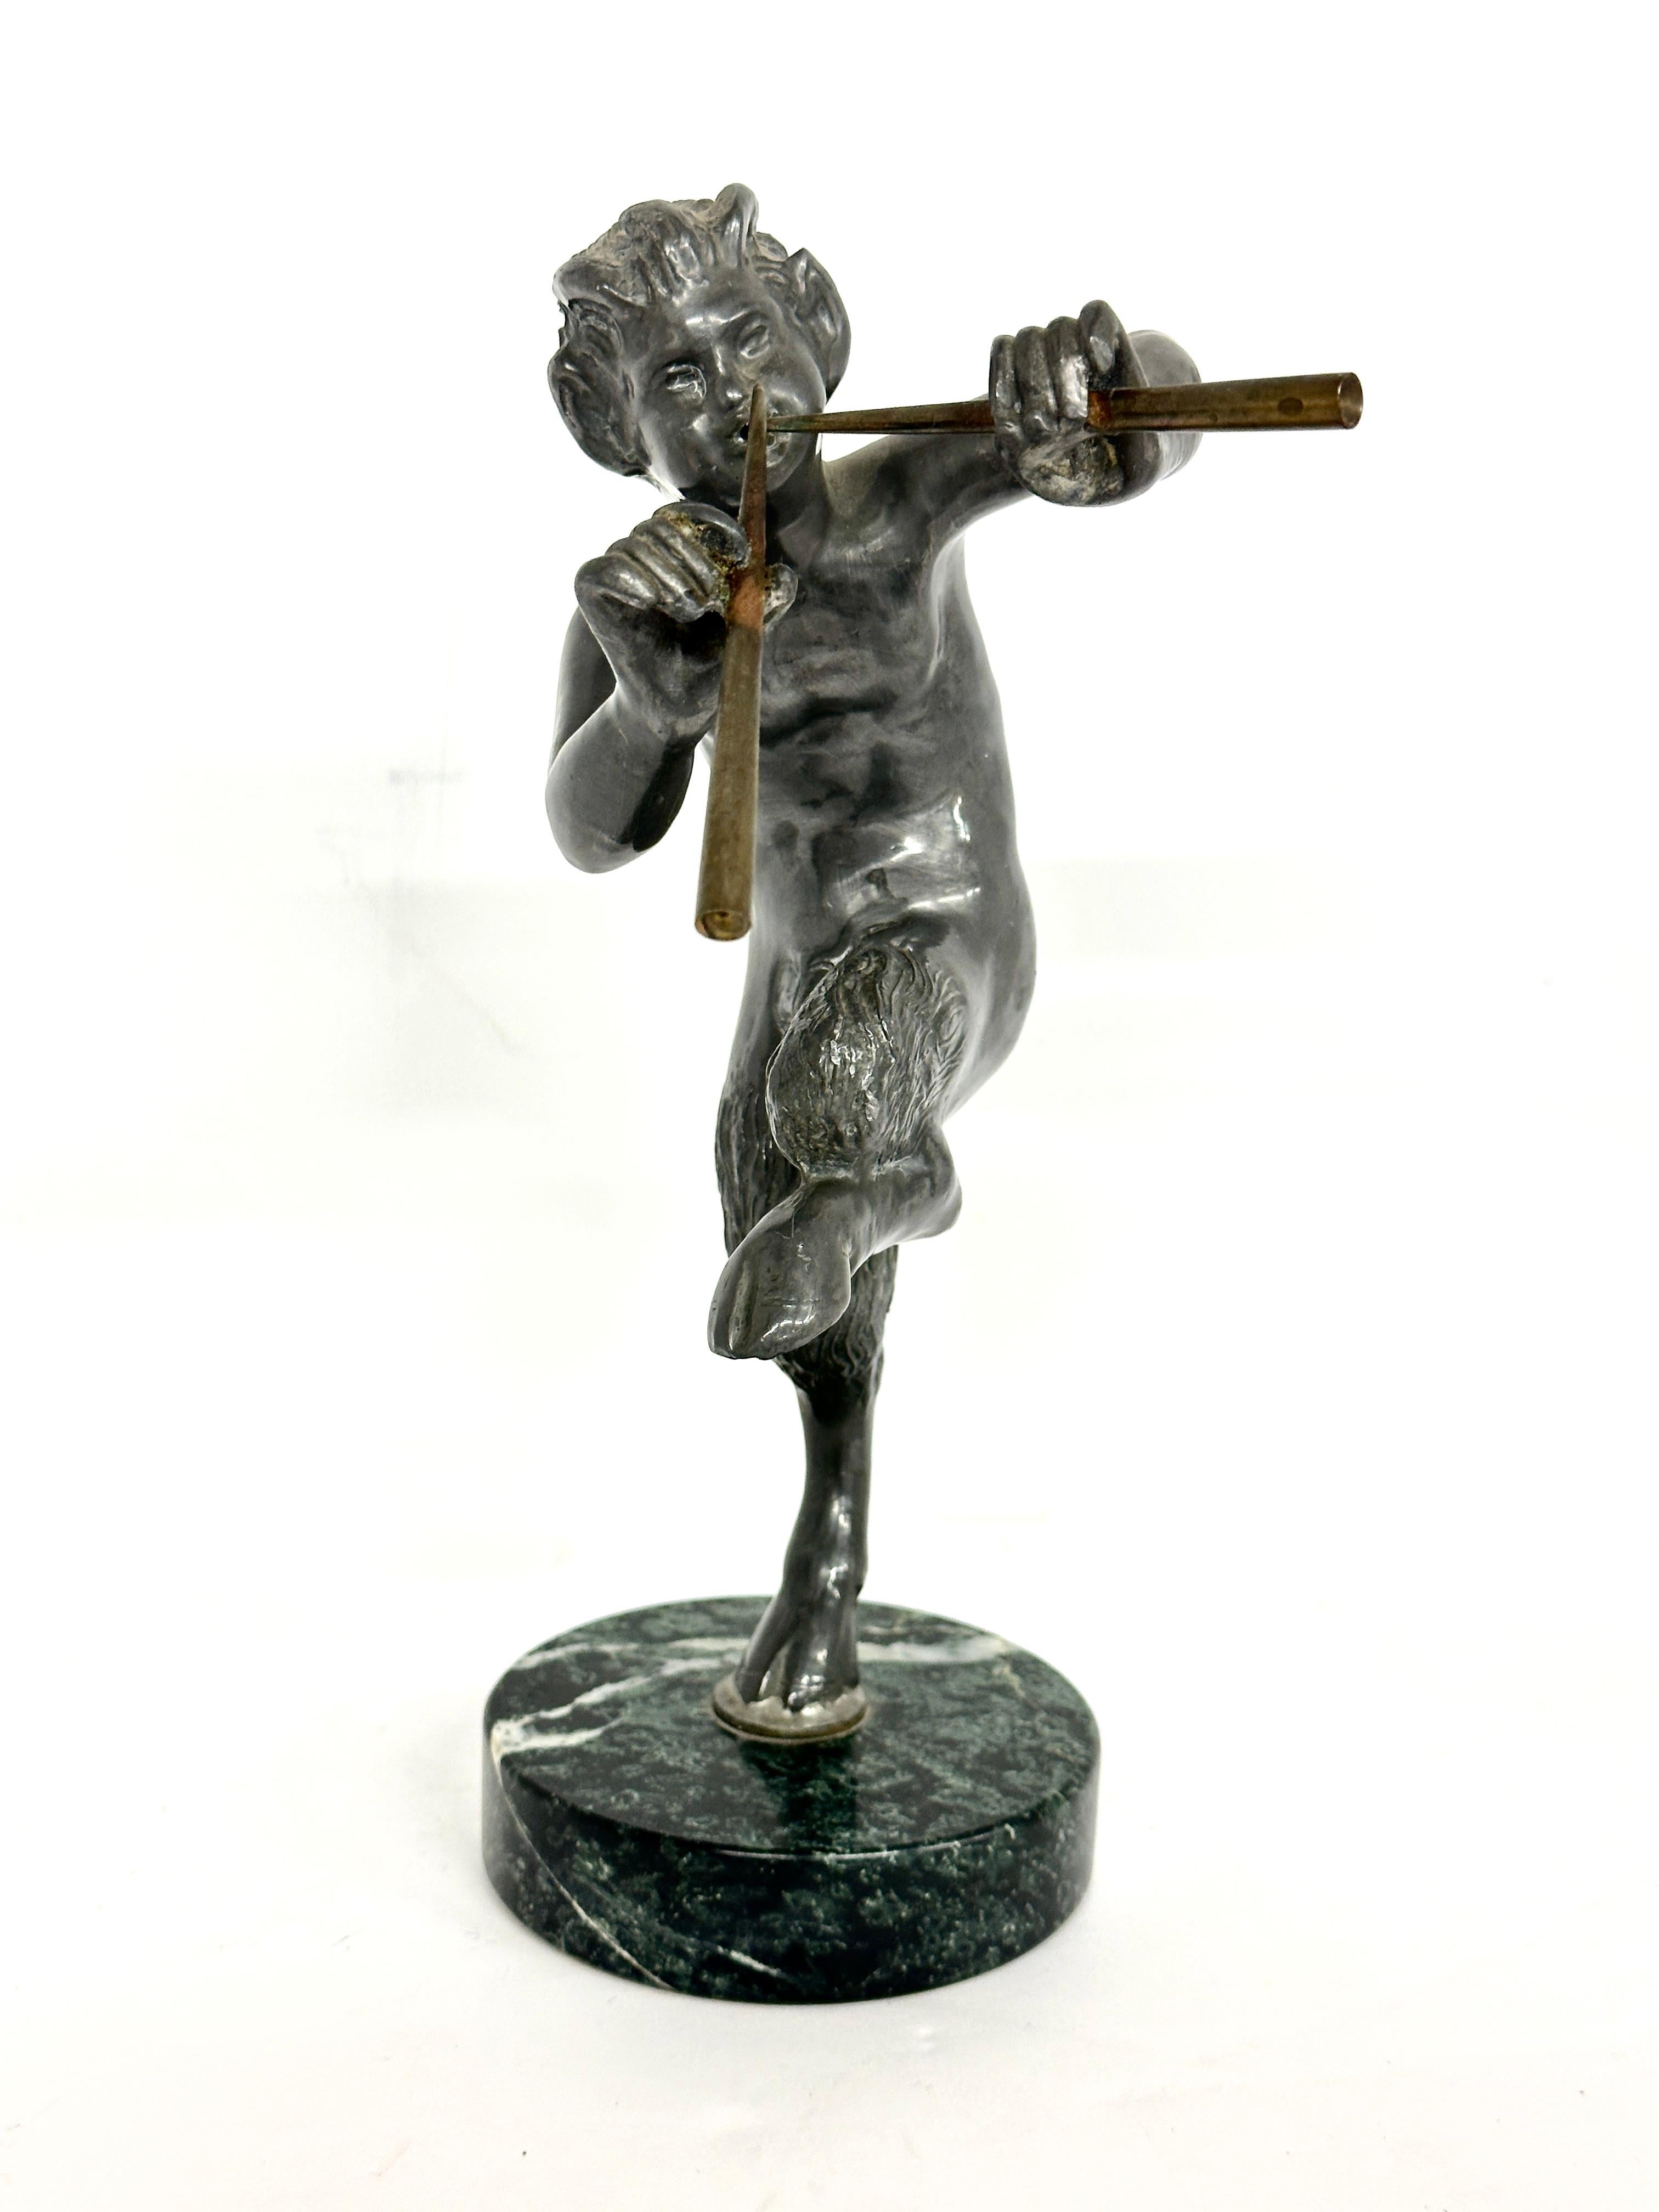 A nice metal sculpture of Pan playing his pipes or flutes. neoclassical grand tour sculpture after the antique. This beautifully cast and finished example is mounted on a round marble base. Likely mid 20th century brought back from a European Tour.